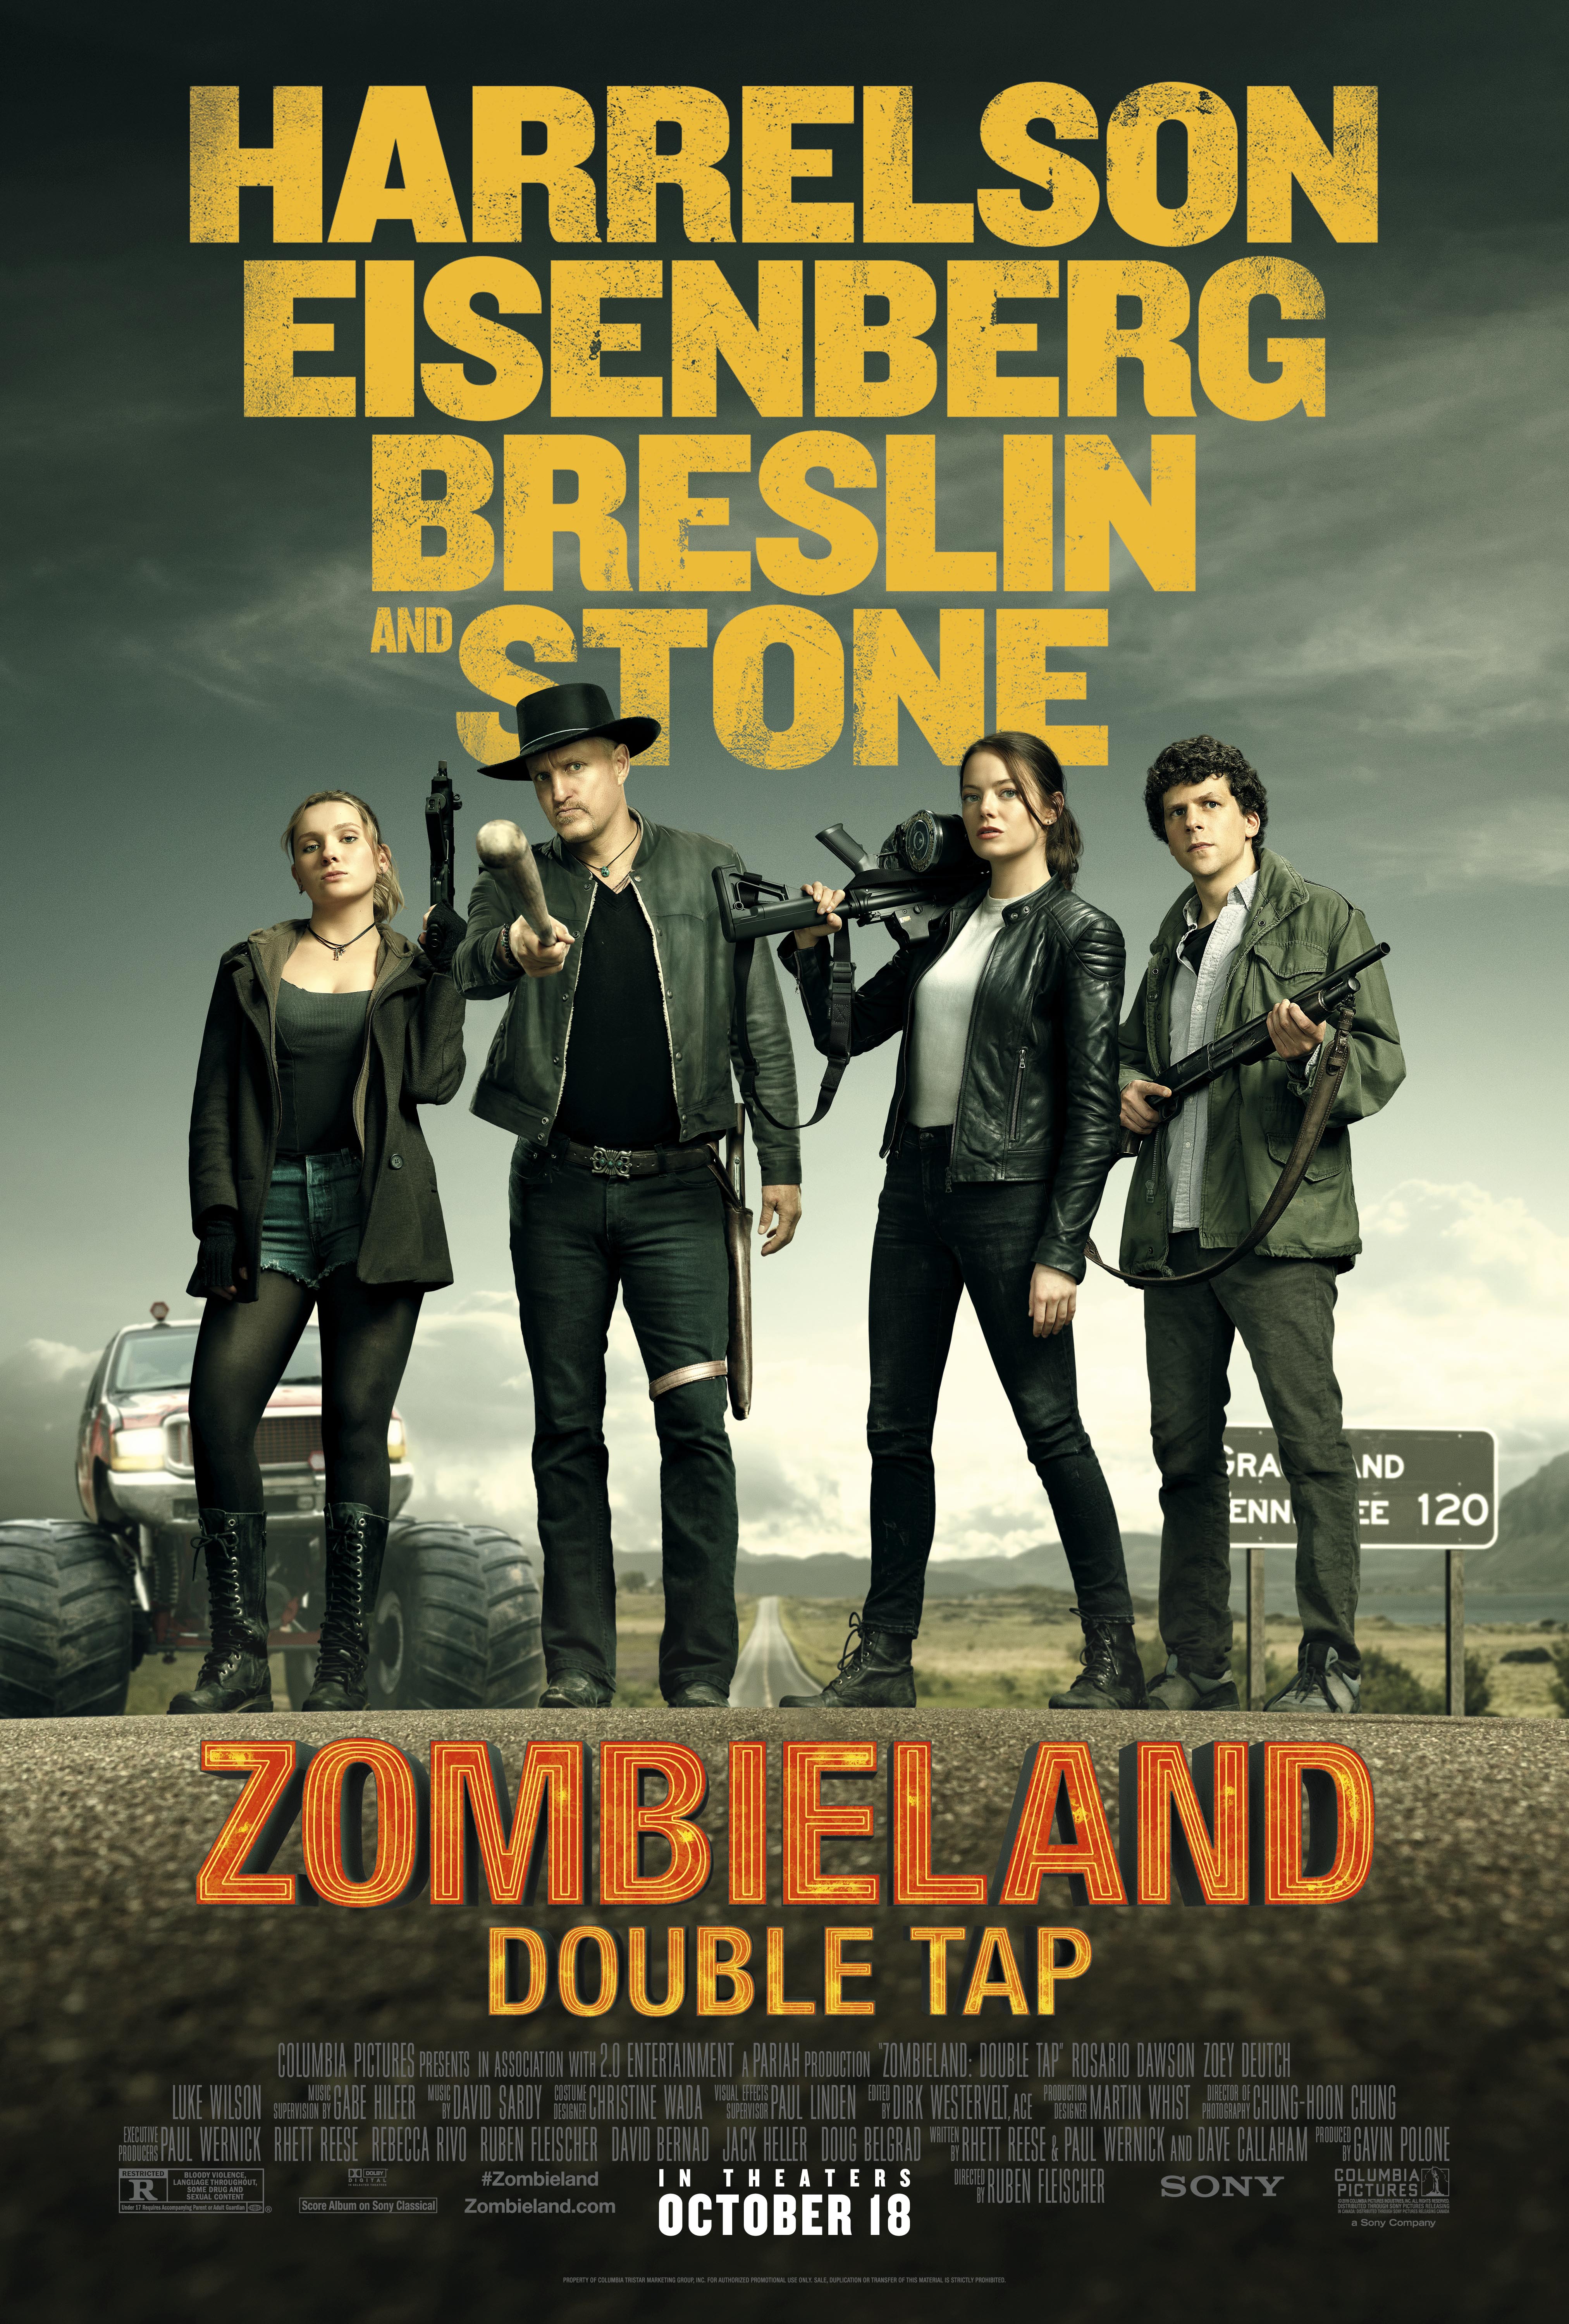 Zombieland: Double Tap best horror movies on amazon prime